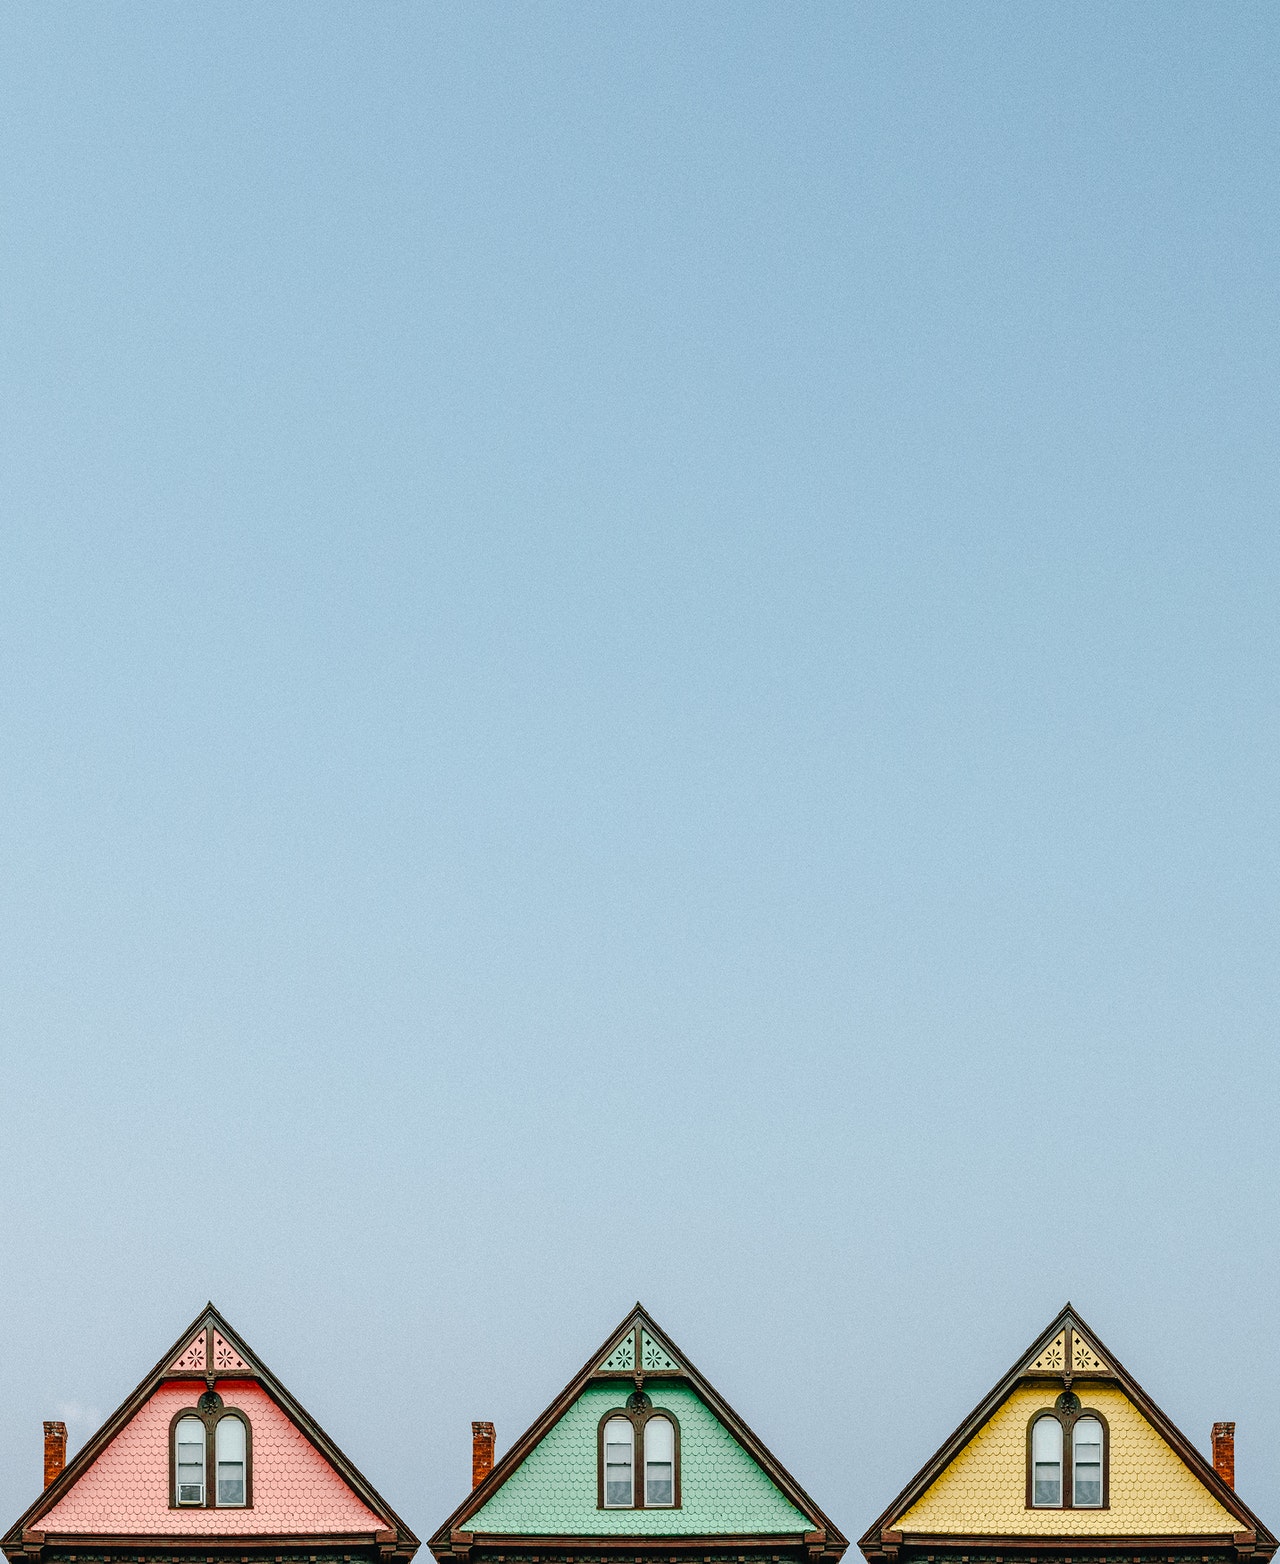 A picture of three roofs one pink, one green, one yellow